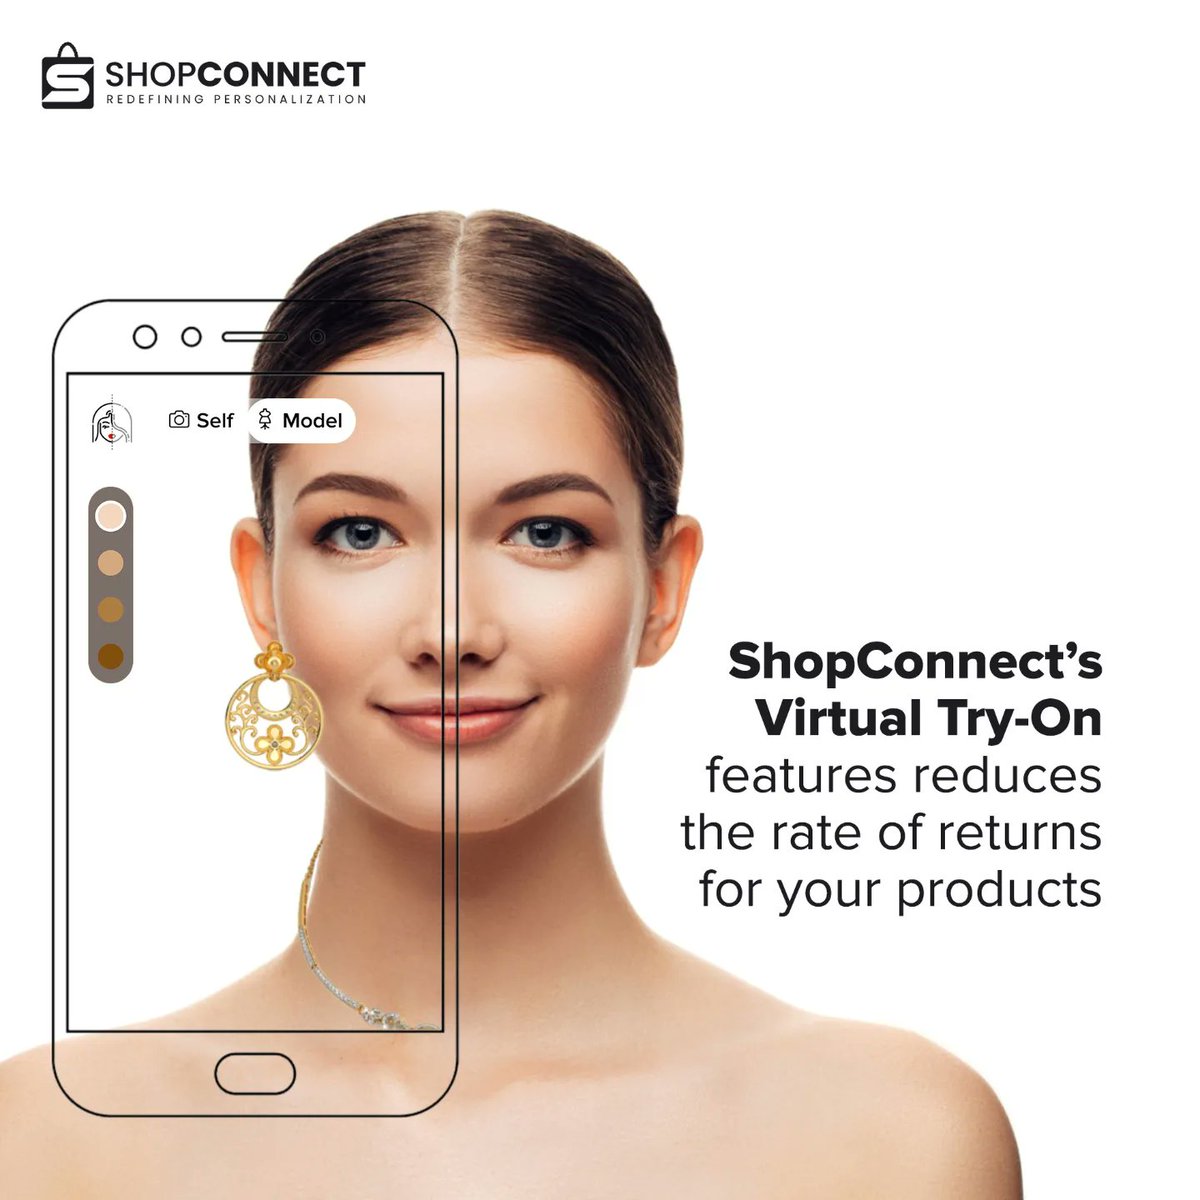 ShopConnect's virtual try-on enables your customers to try your products in real time with the help of AR. This allows them choose the style, size and  fit before making a purchase, reducing the rates of returns significantly. 

#ConnectedShopping with ShopConnect

#virtualtryon